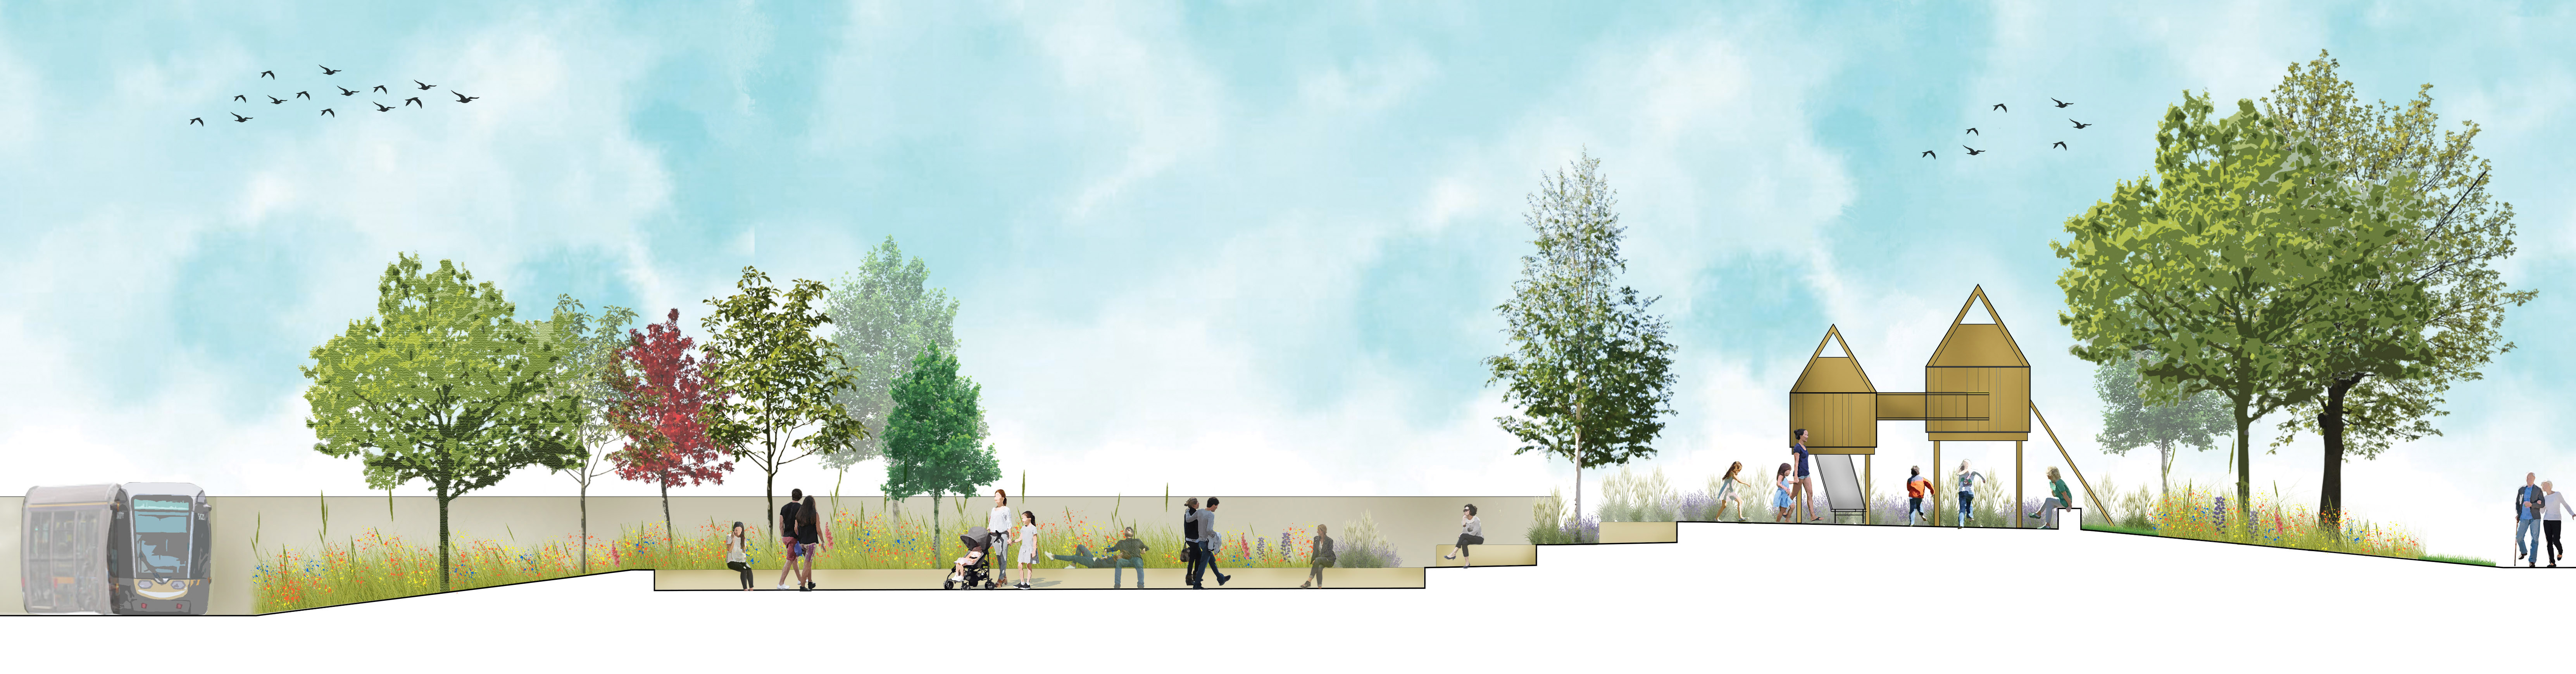 St. James's Linear park section - show basin lane proposed play space 